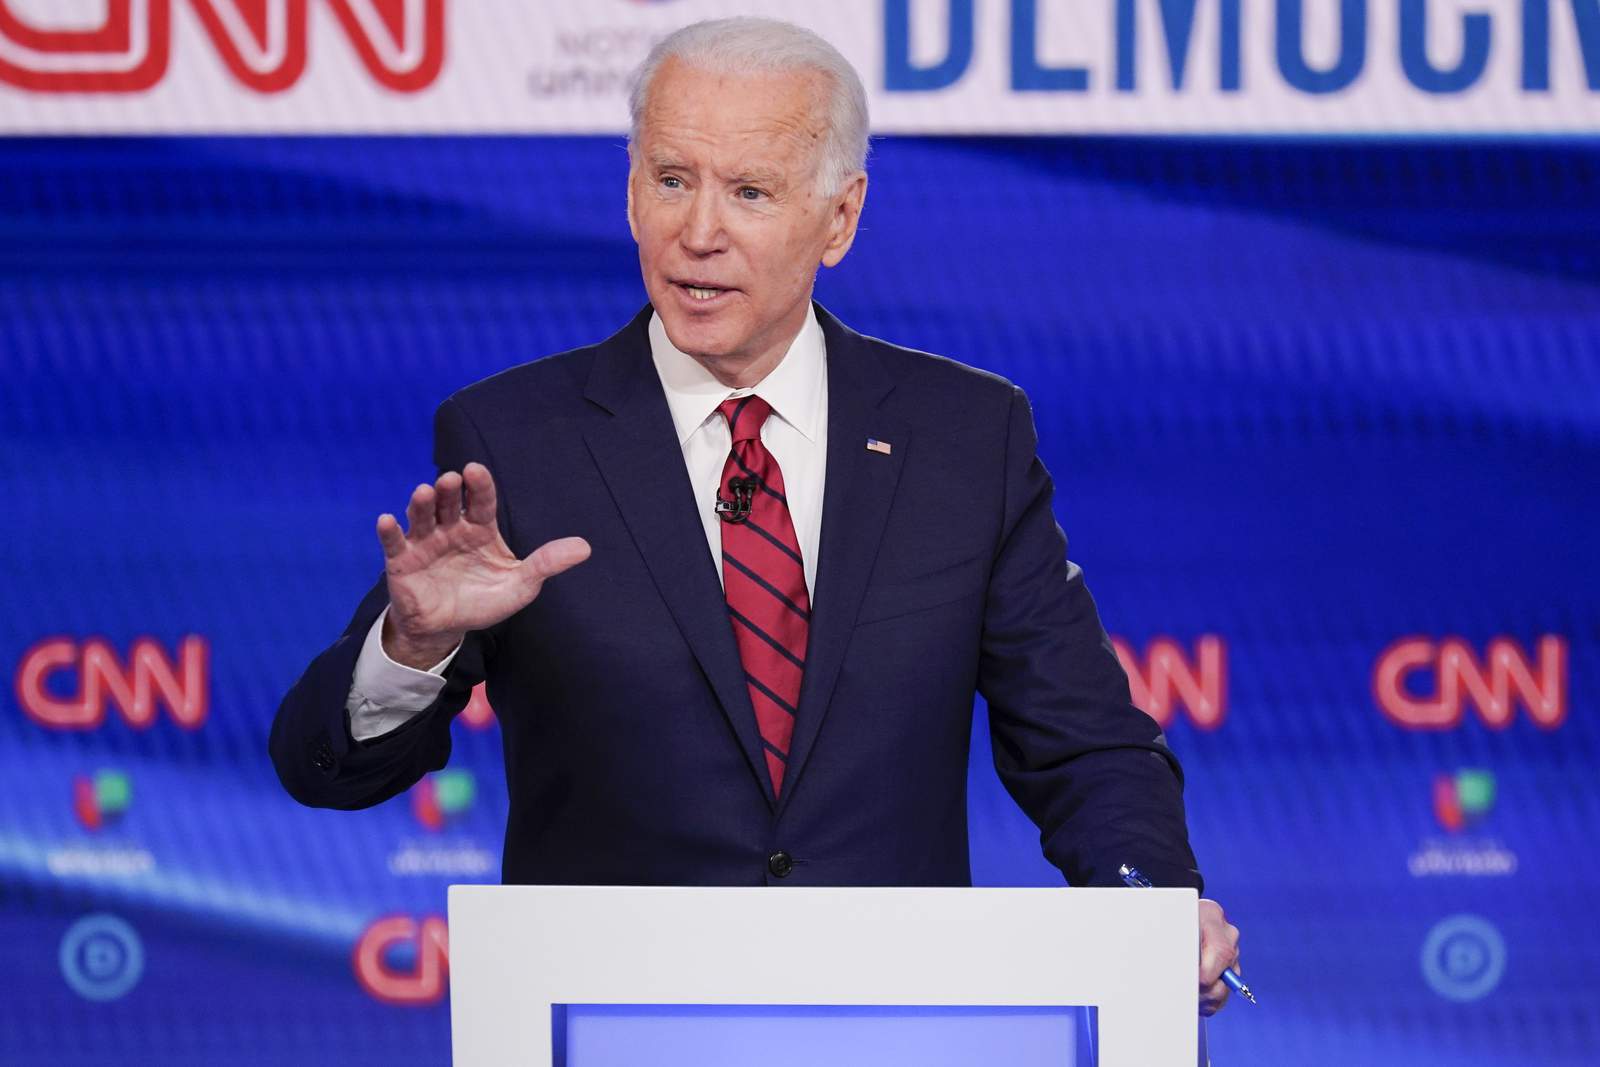 Biden says he was too 'cavalier' about black voters' choices